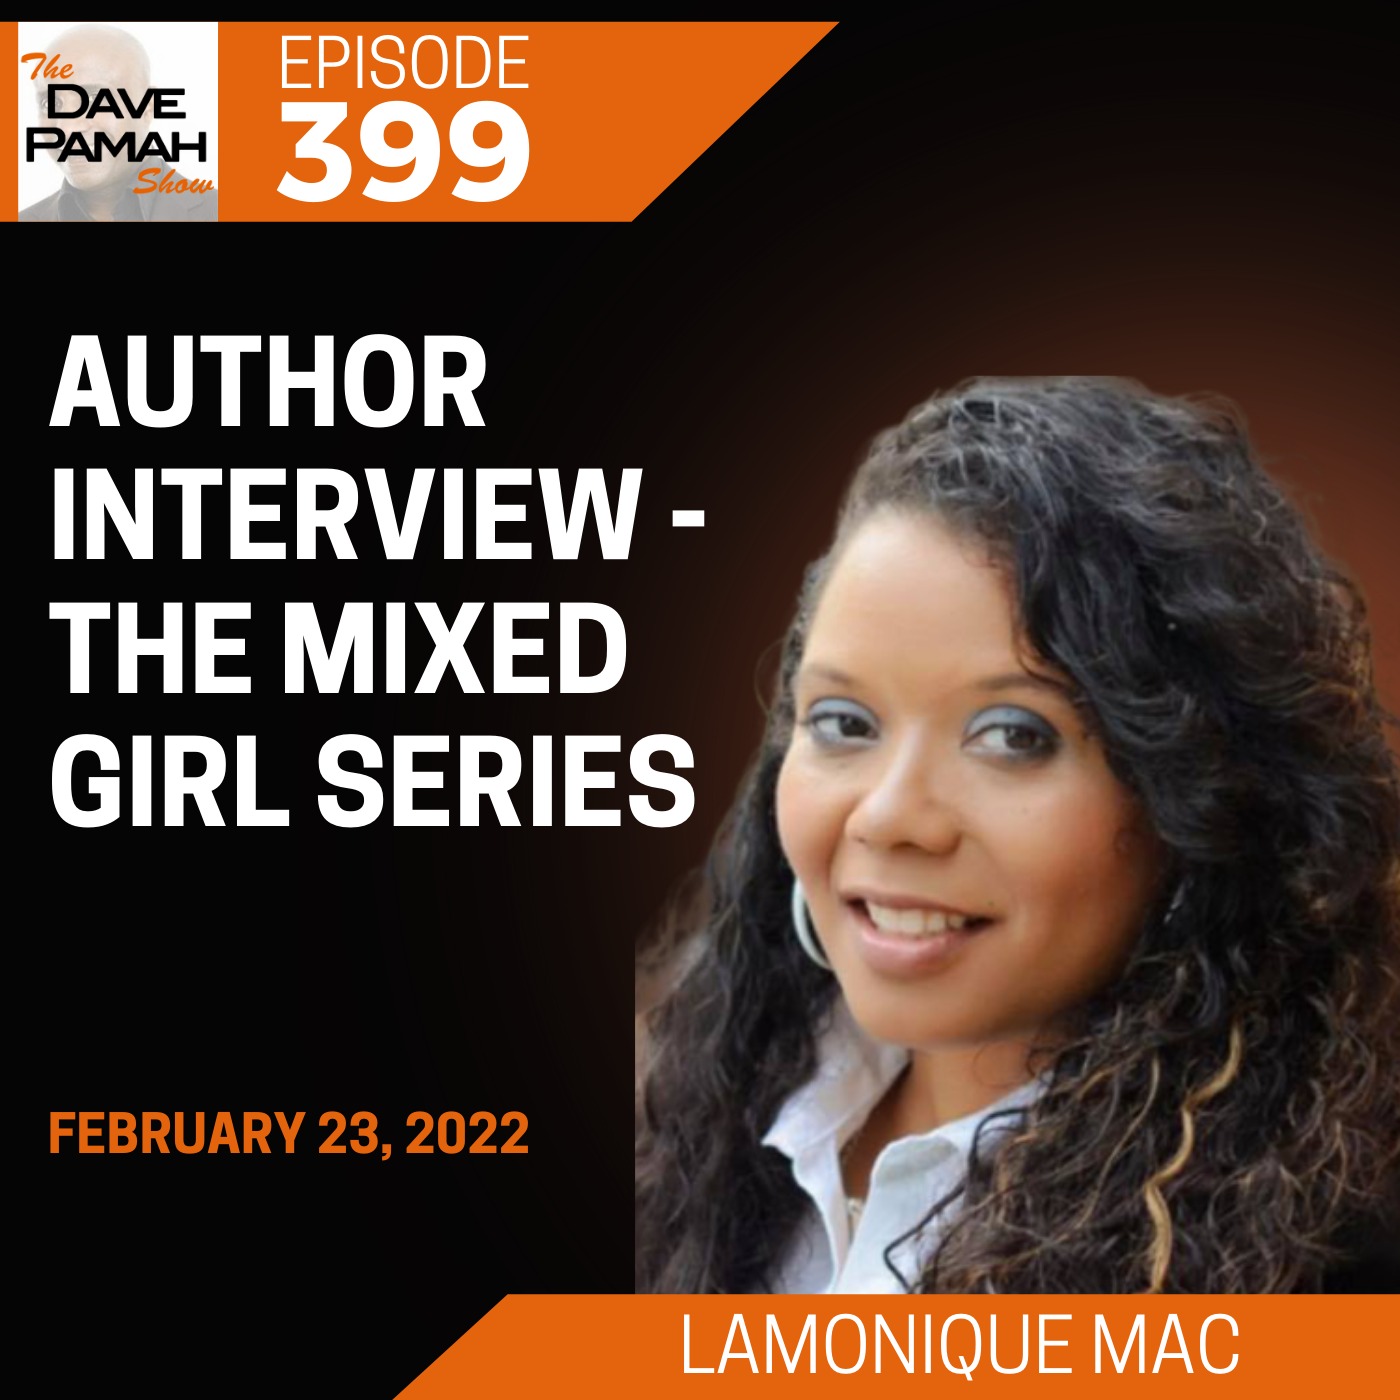 Author Interview - The Mixed Girl Series with Lamonique Mac